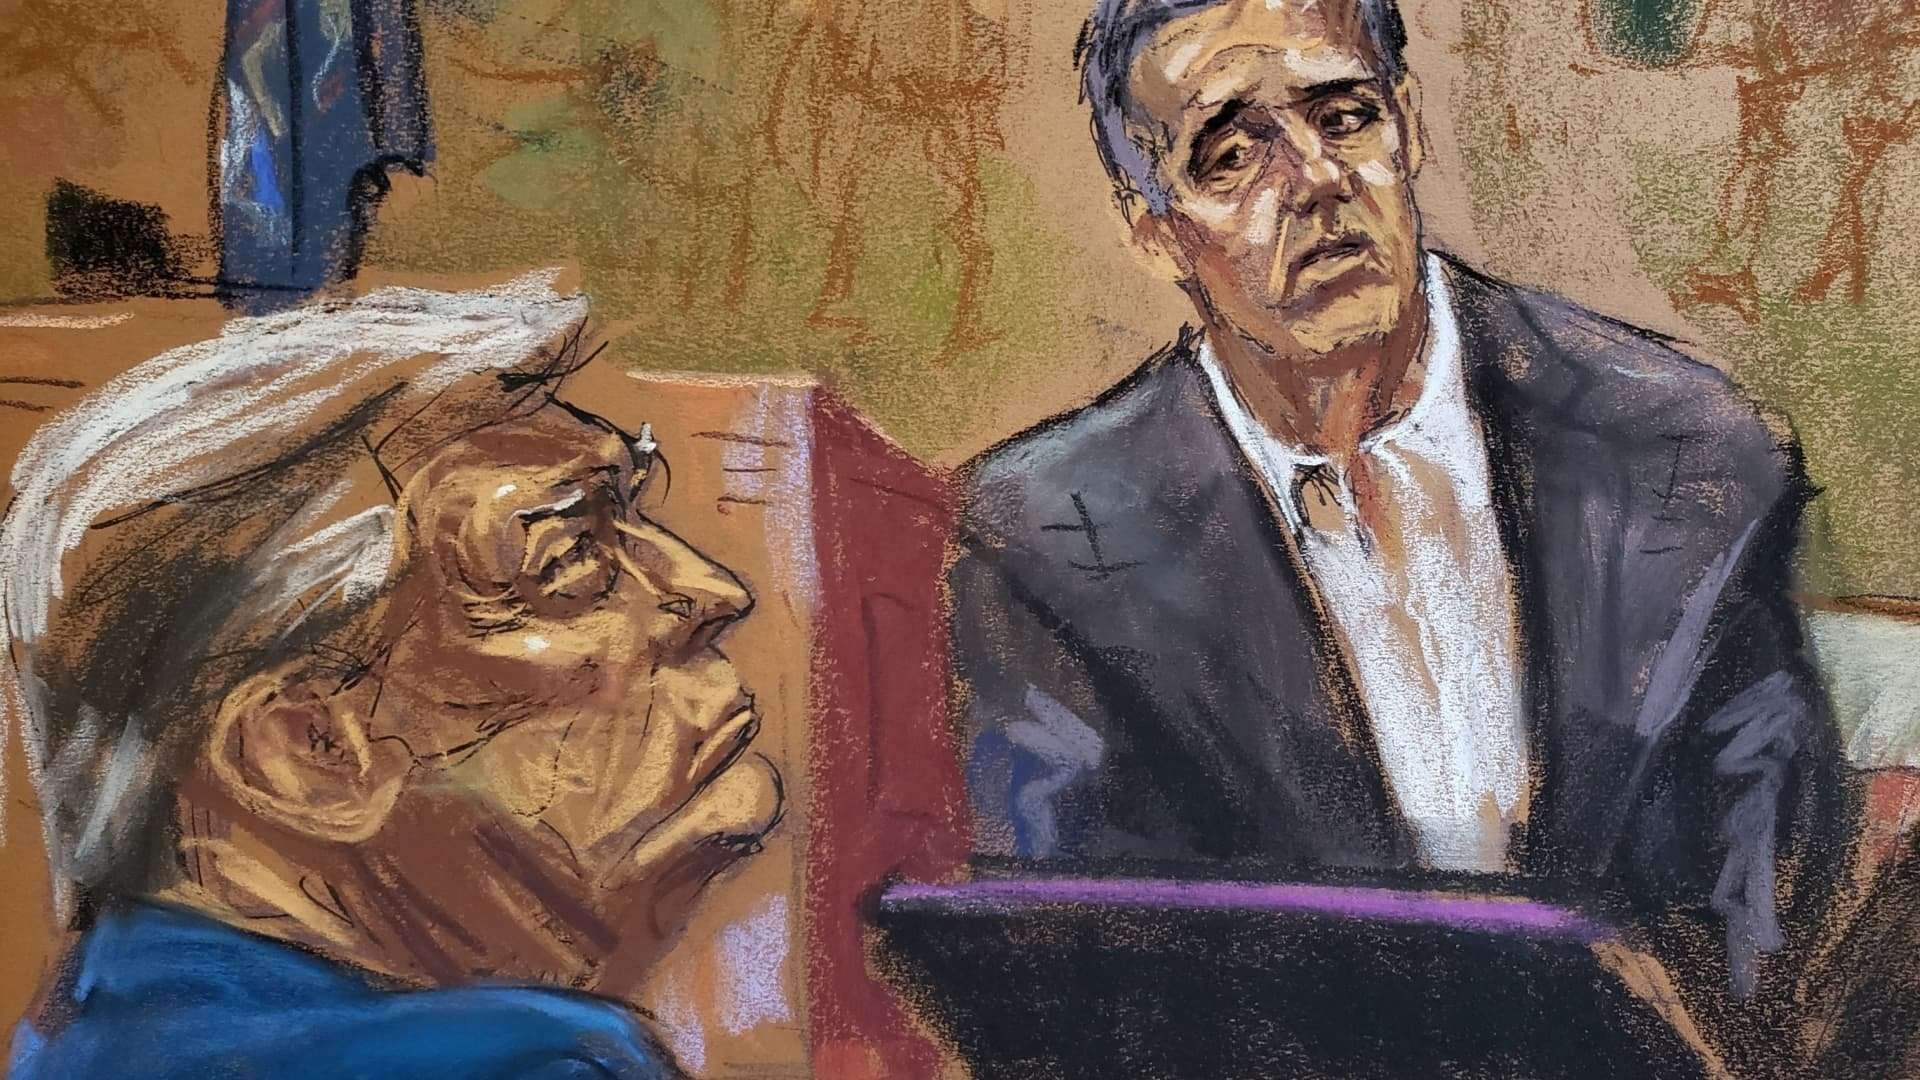 image for Trump targets two likely witnesses ahead of his criminal trial, despite gag order